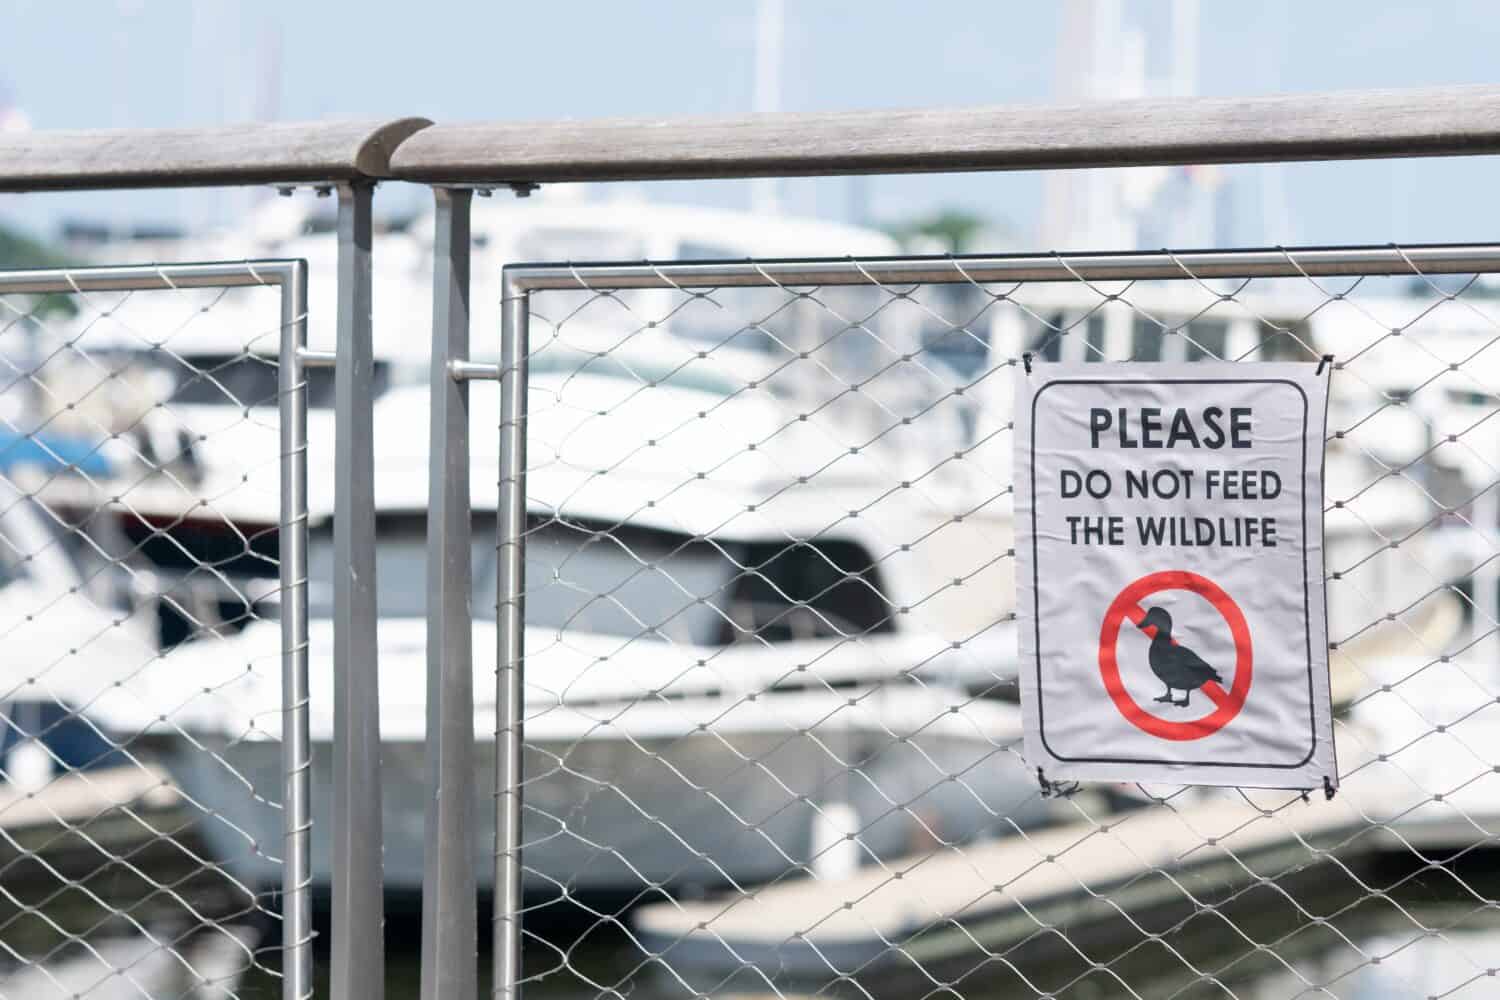 metal sign on temporary chain link fence outside of urban waterfront boating marina reads Please Do Not Feed Wildlife with a icon of the native migratory waterfowl duck with a red strike through it